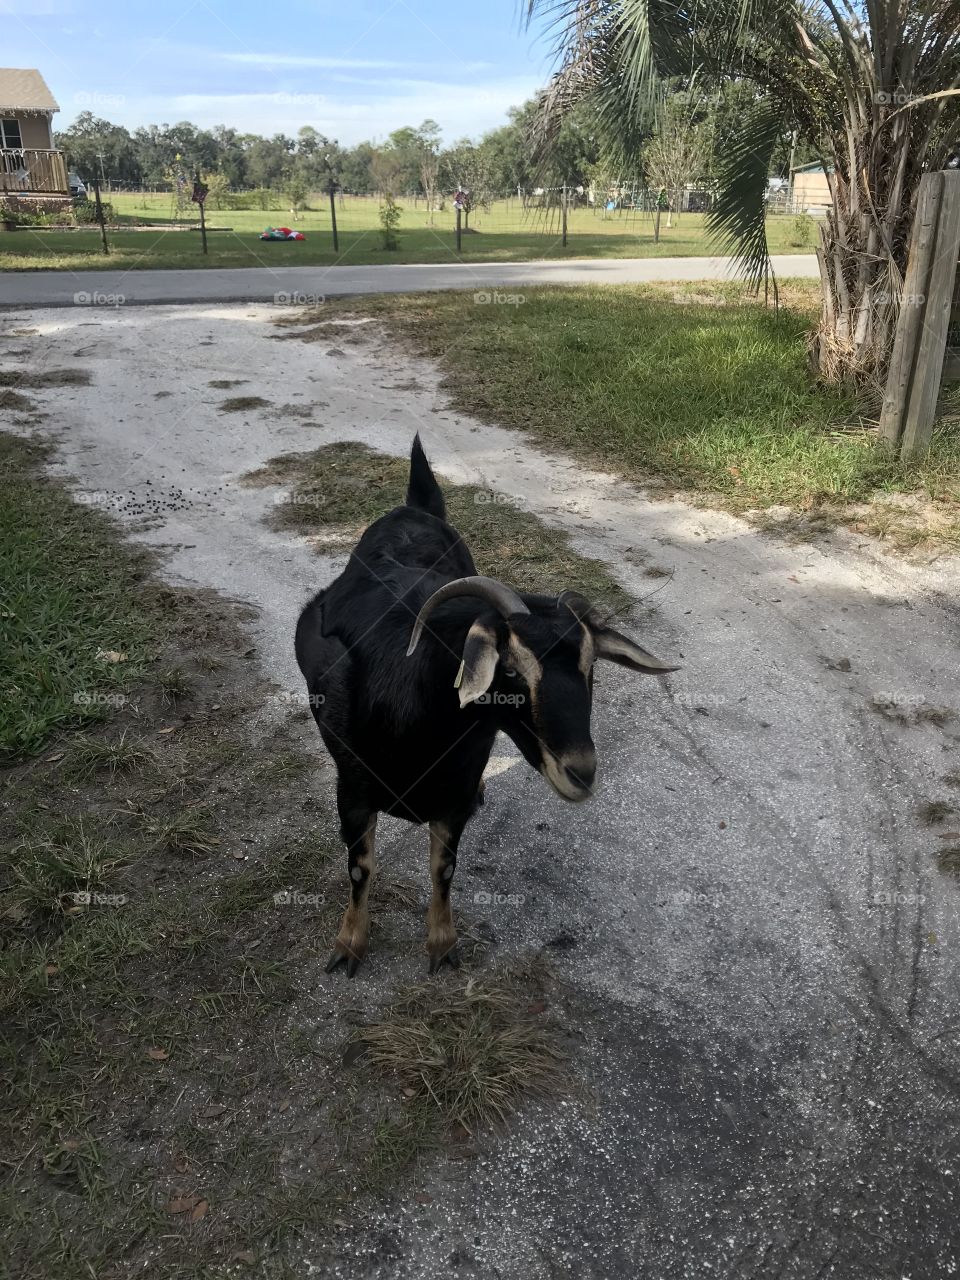 A visit from my neighbor goat